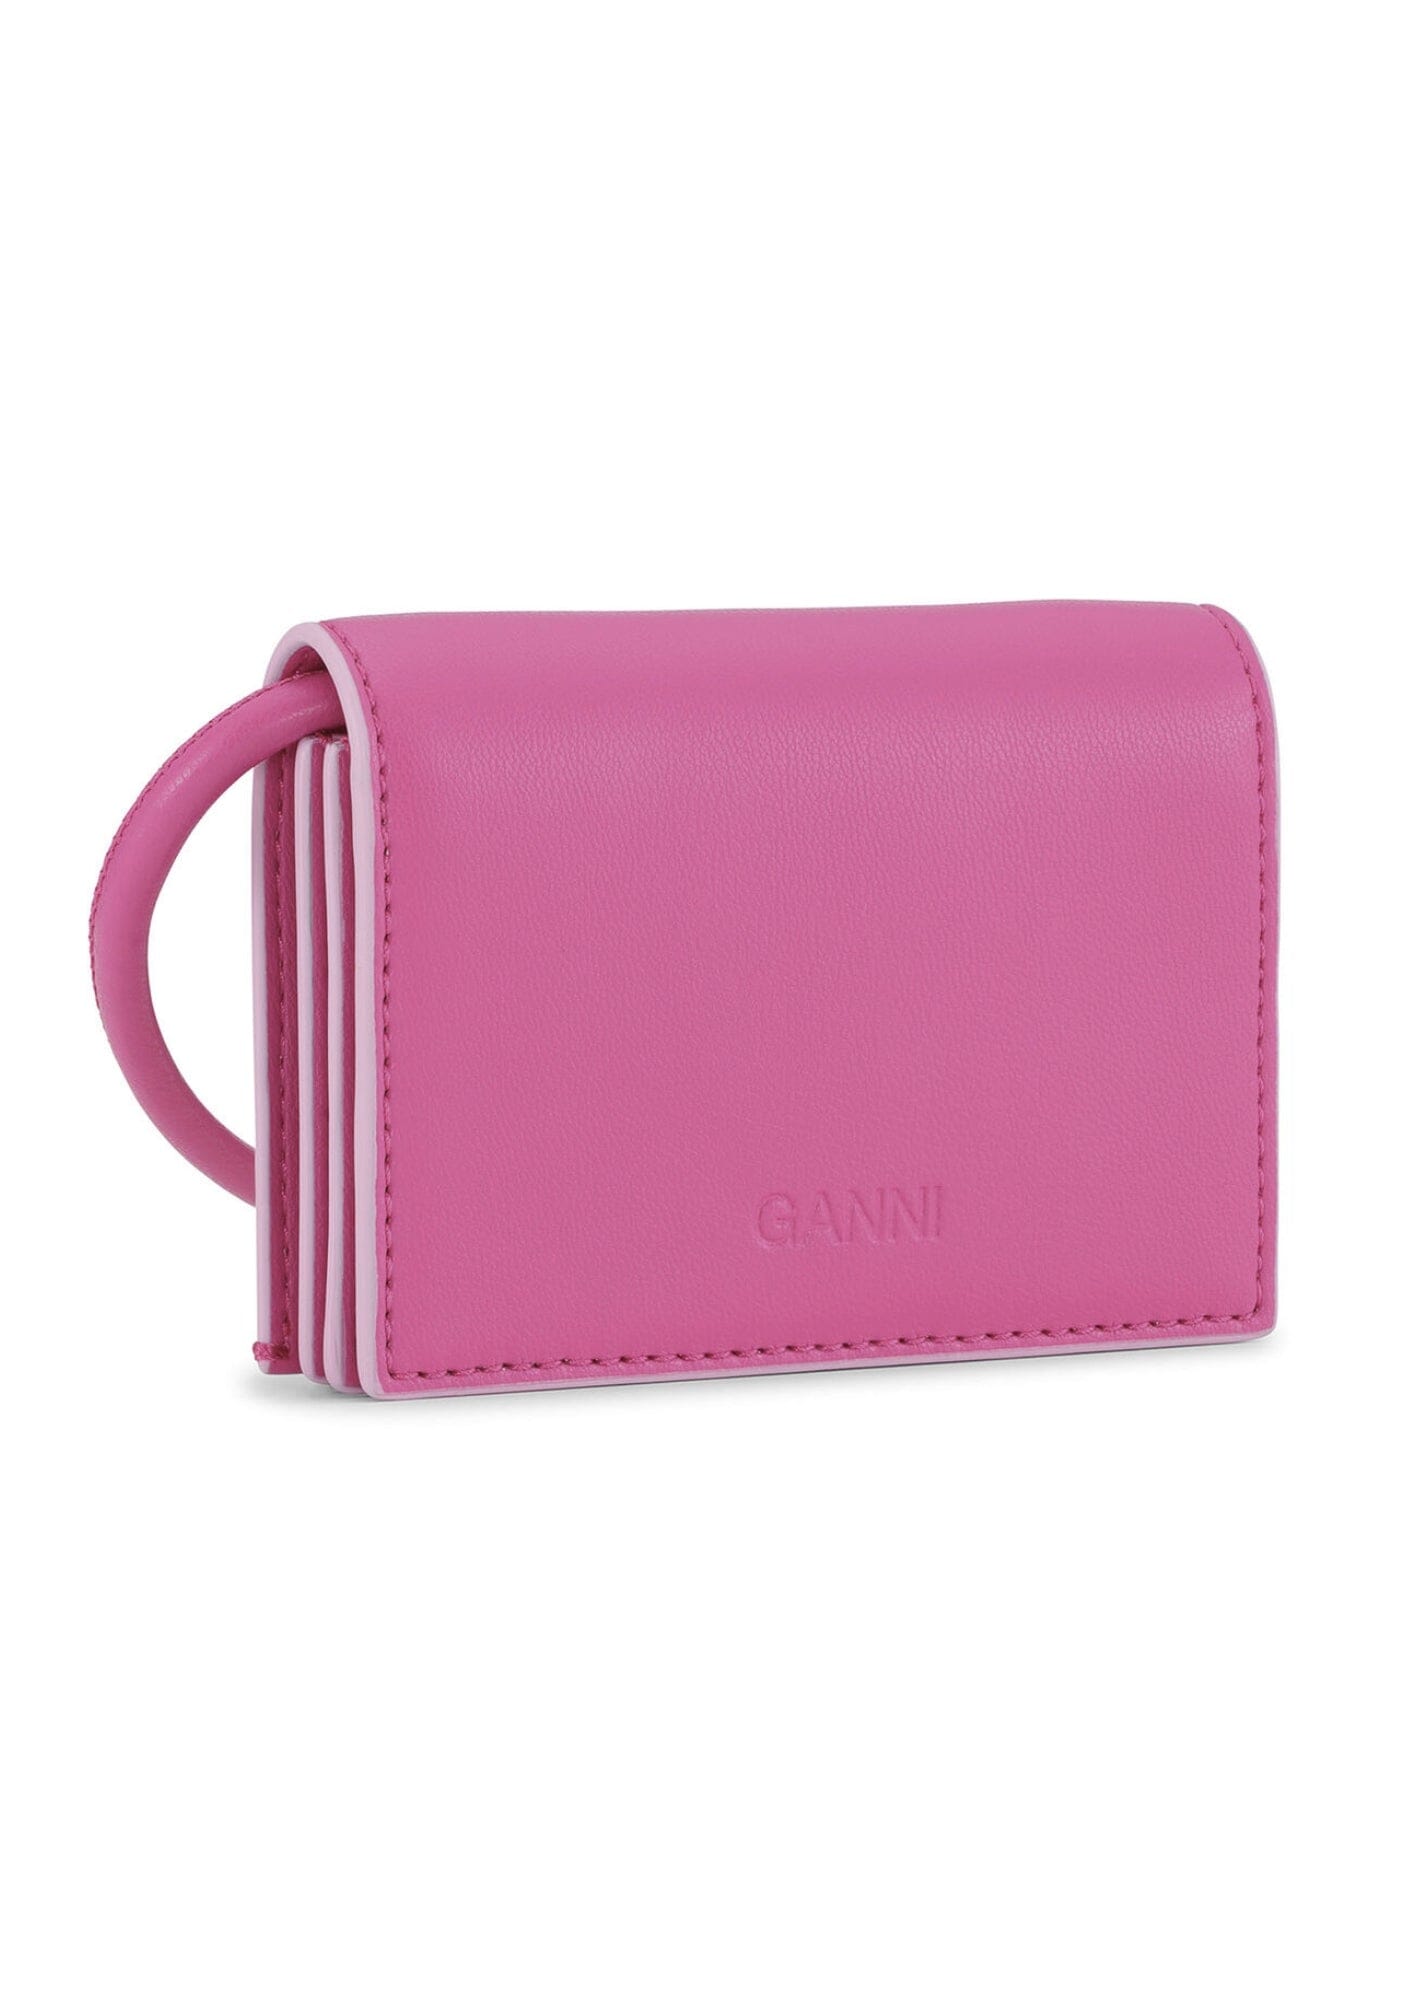 Ganni Bou Trifold Wallet / Caramel Cafe - Seletti Concept Store